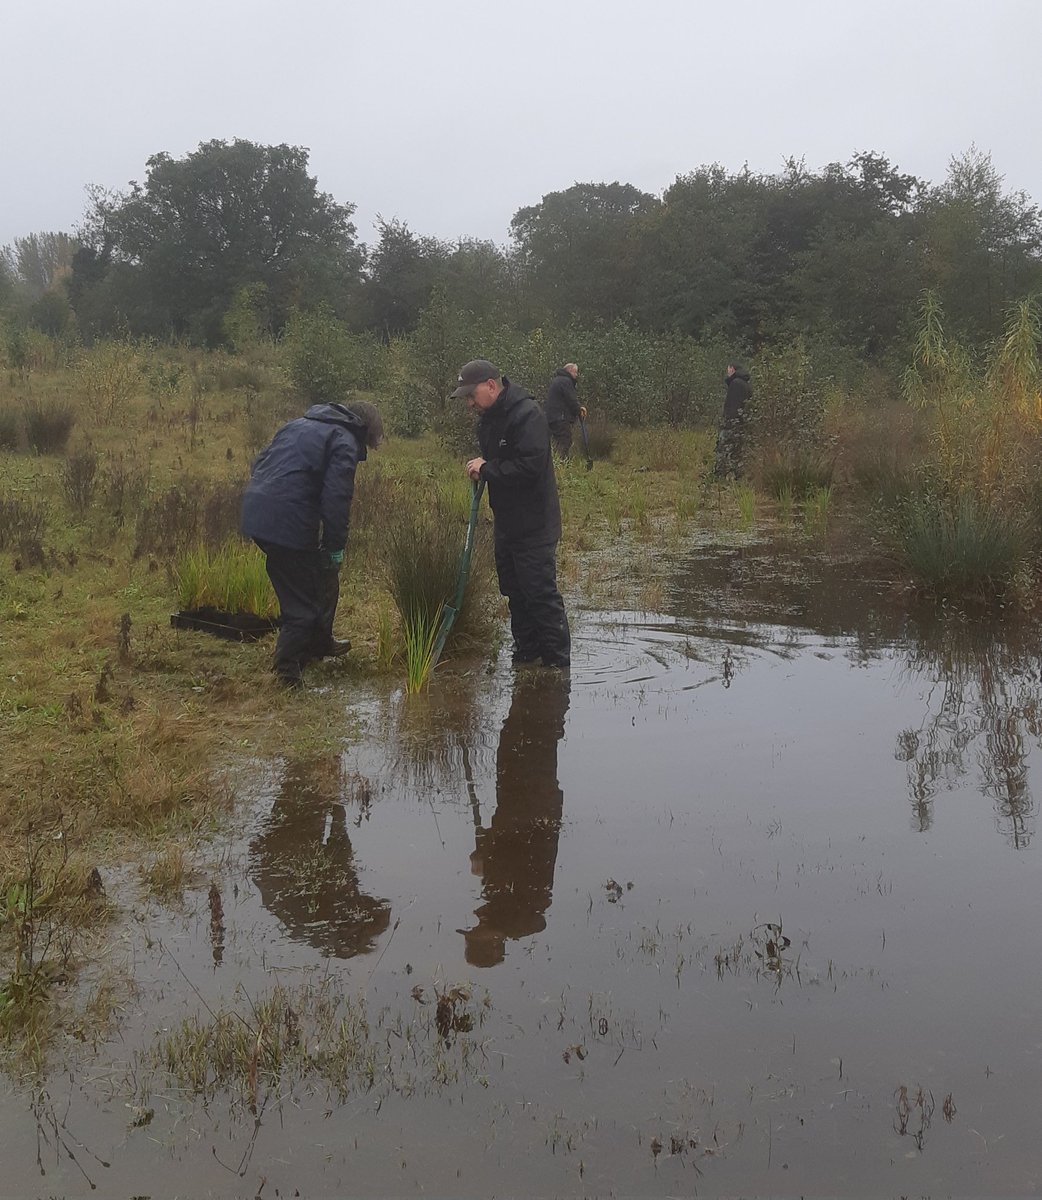 A murky day at Ripon City Wetlands for another partnership planting session. Volunteers from Lower Ure Conservation Trust & @YWT_North planting Great Fen Sedge grown at @NosterfieldLNR habitat creation nursery. Working together to improve our wetlands.